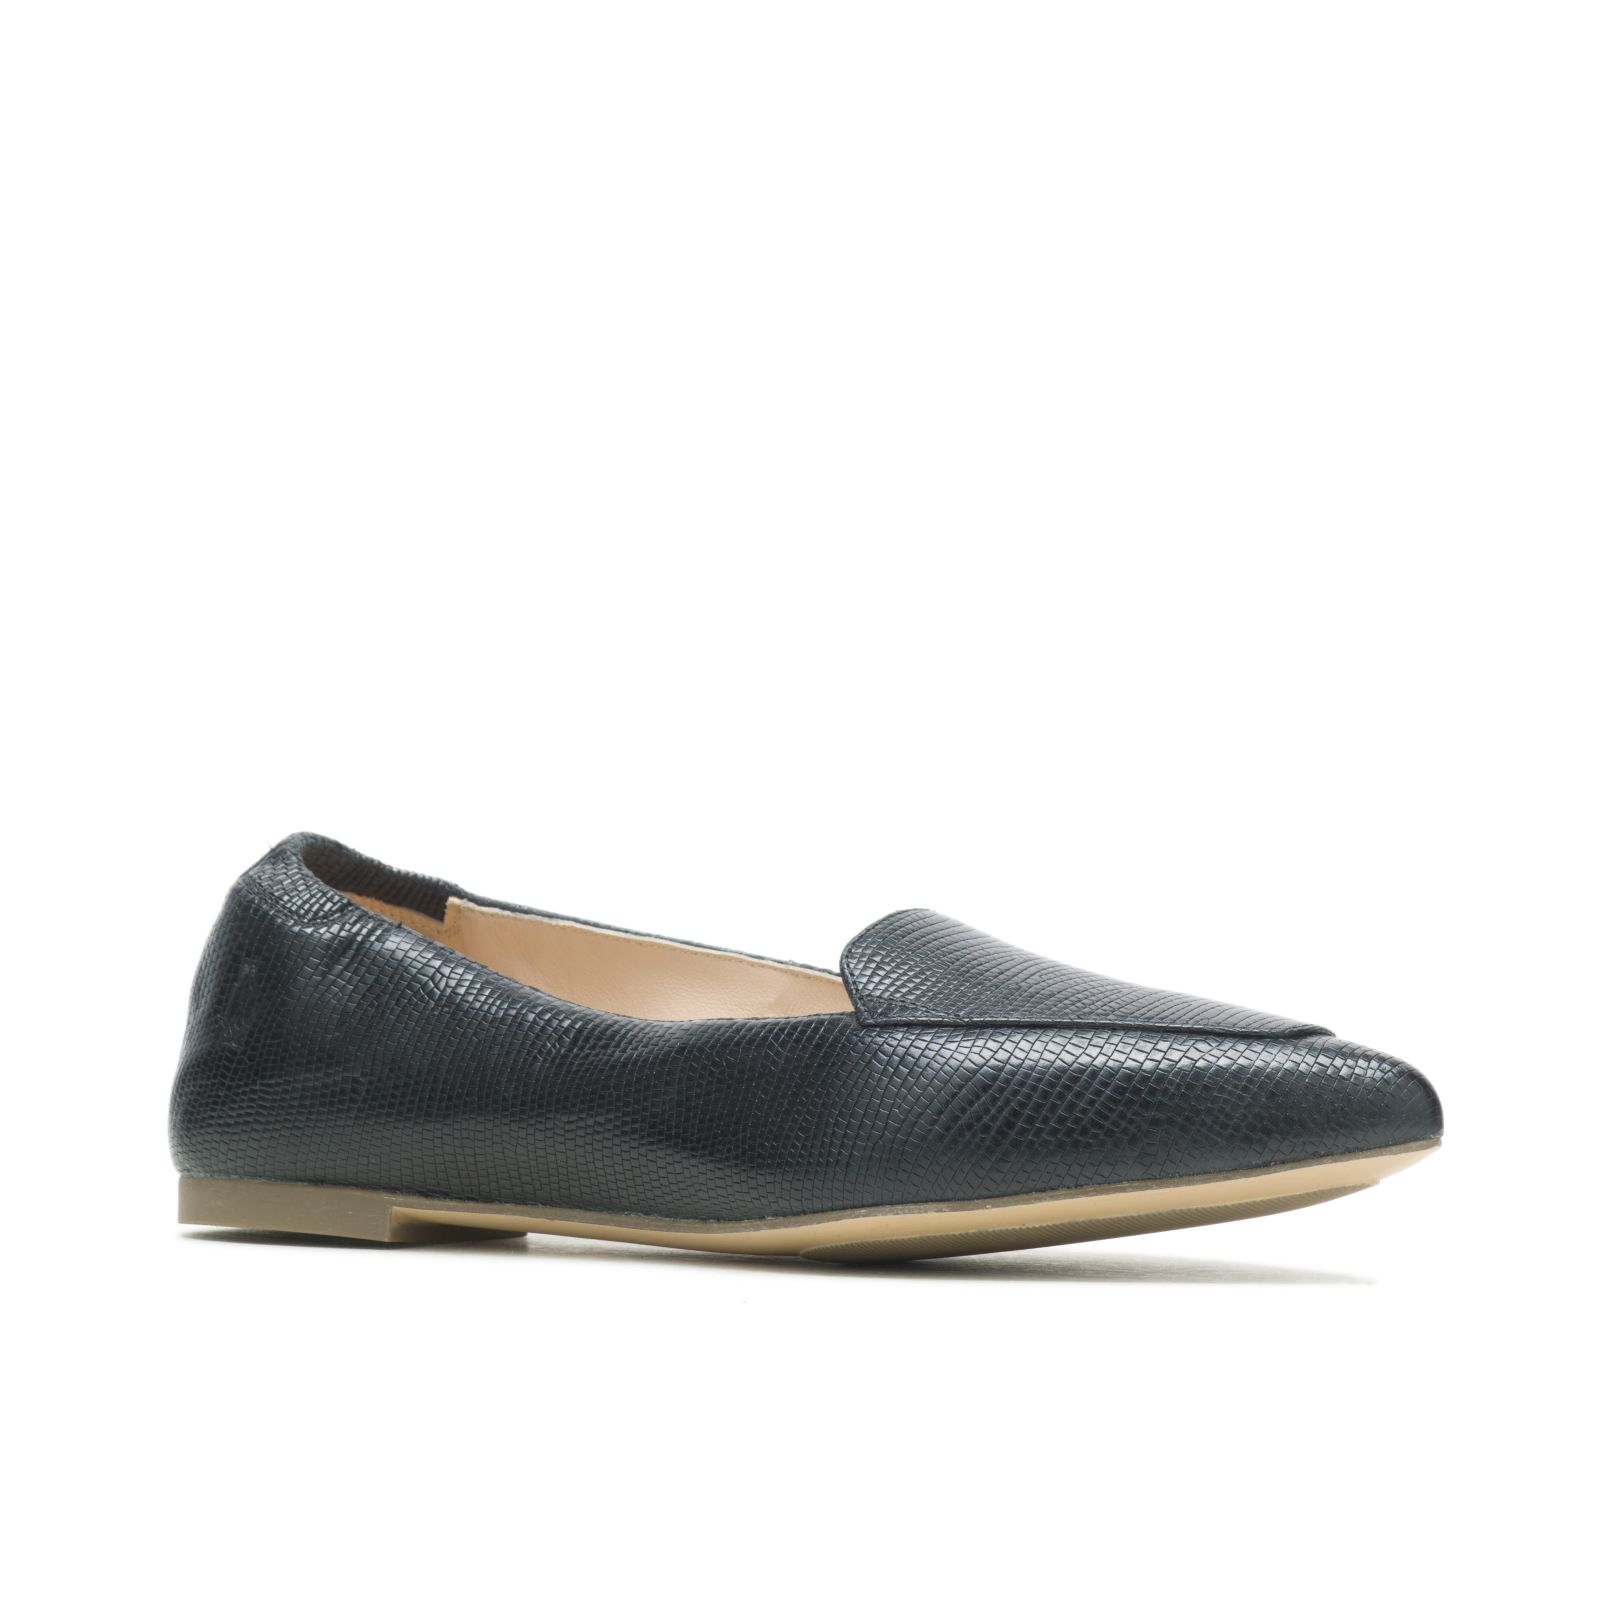 Loafers Hush Puppies Hazel Pointe Mujer Negros | TQDVHWJ-46